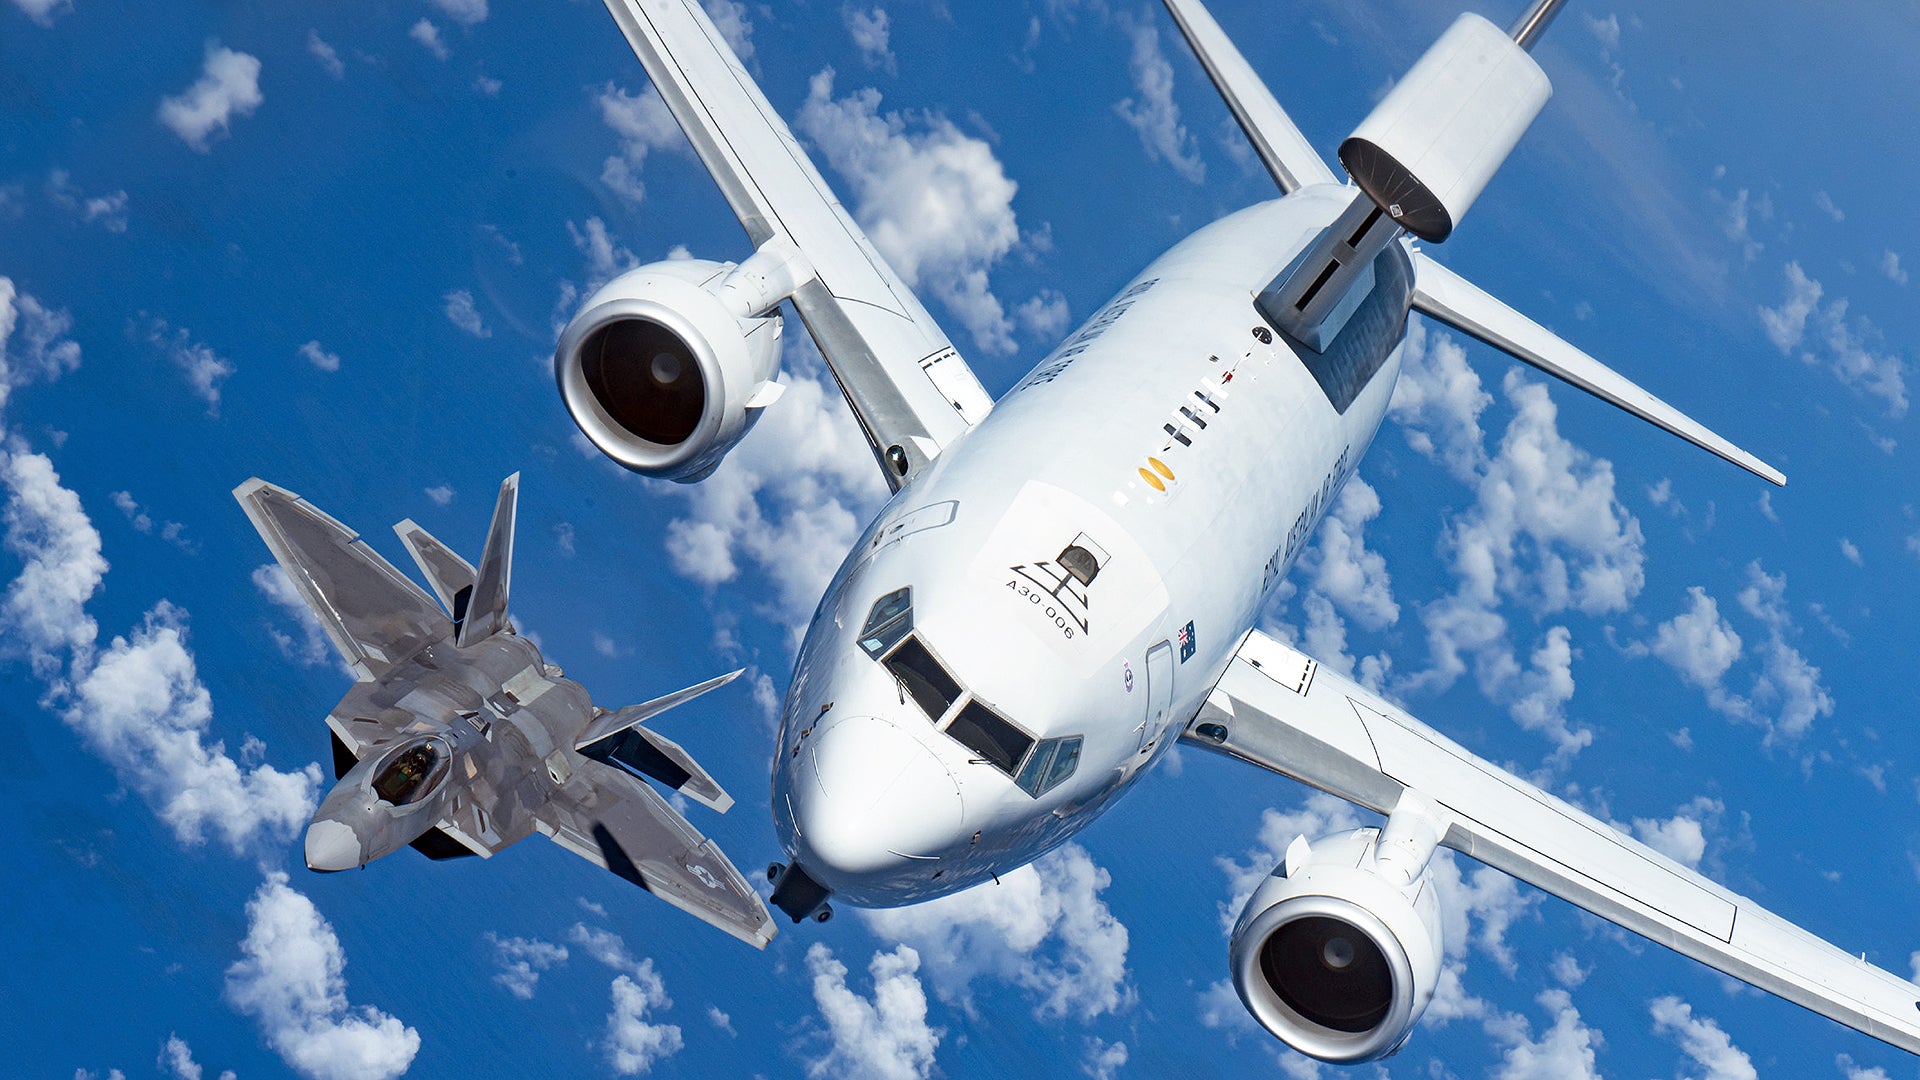 This Is What USAF's Future E-7 Radar Jet Is Actually Capable Of